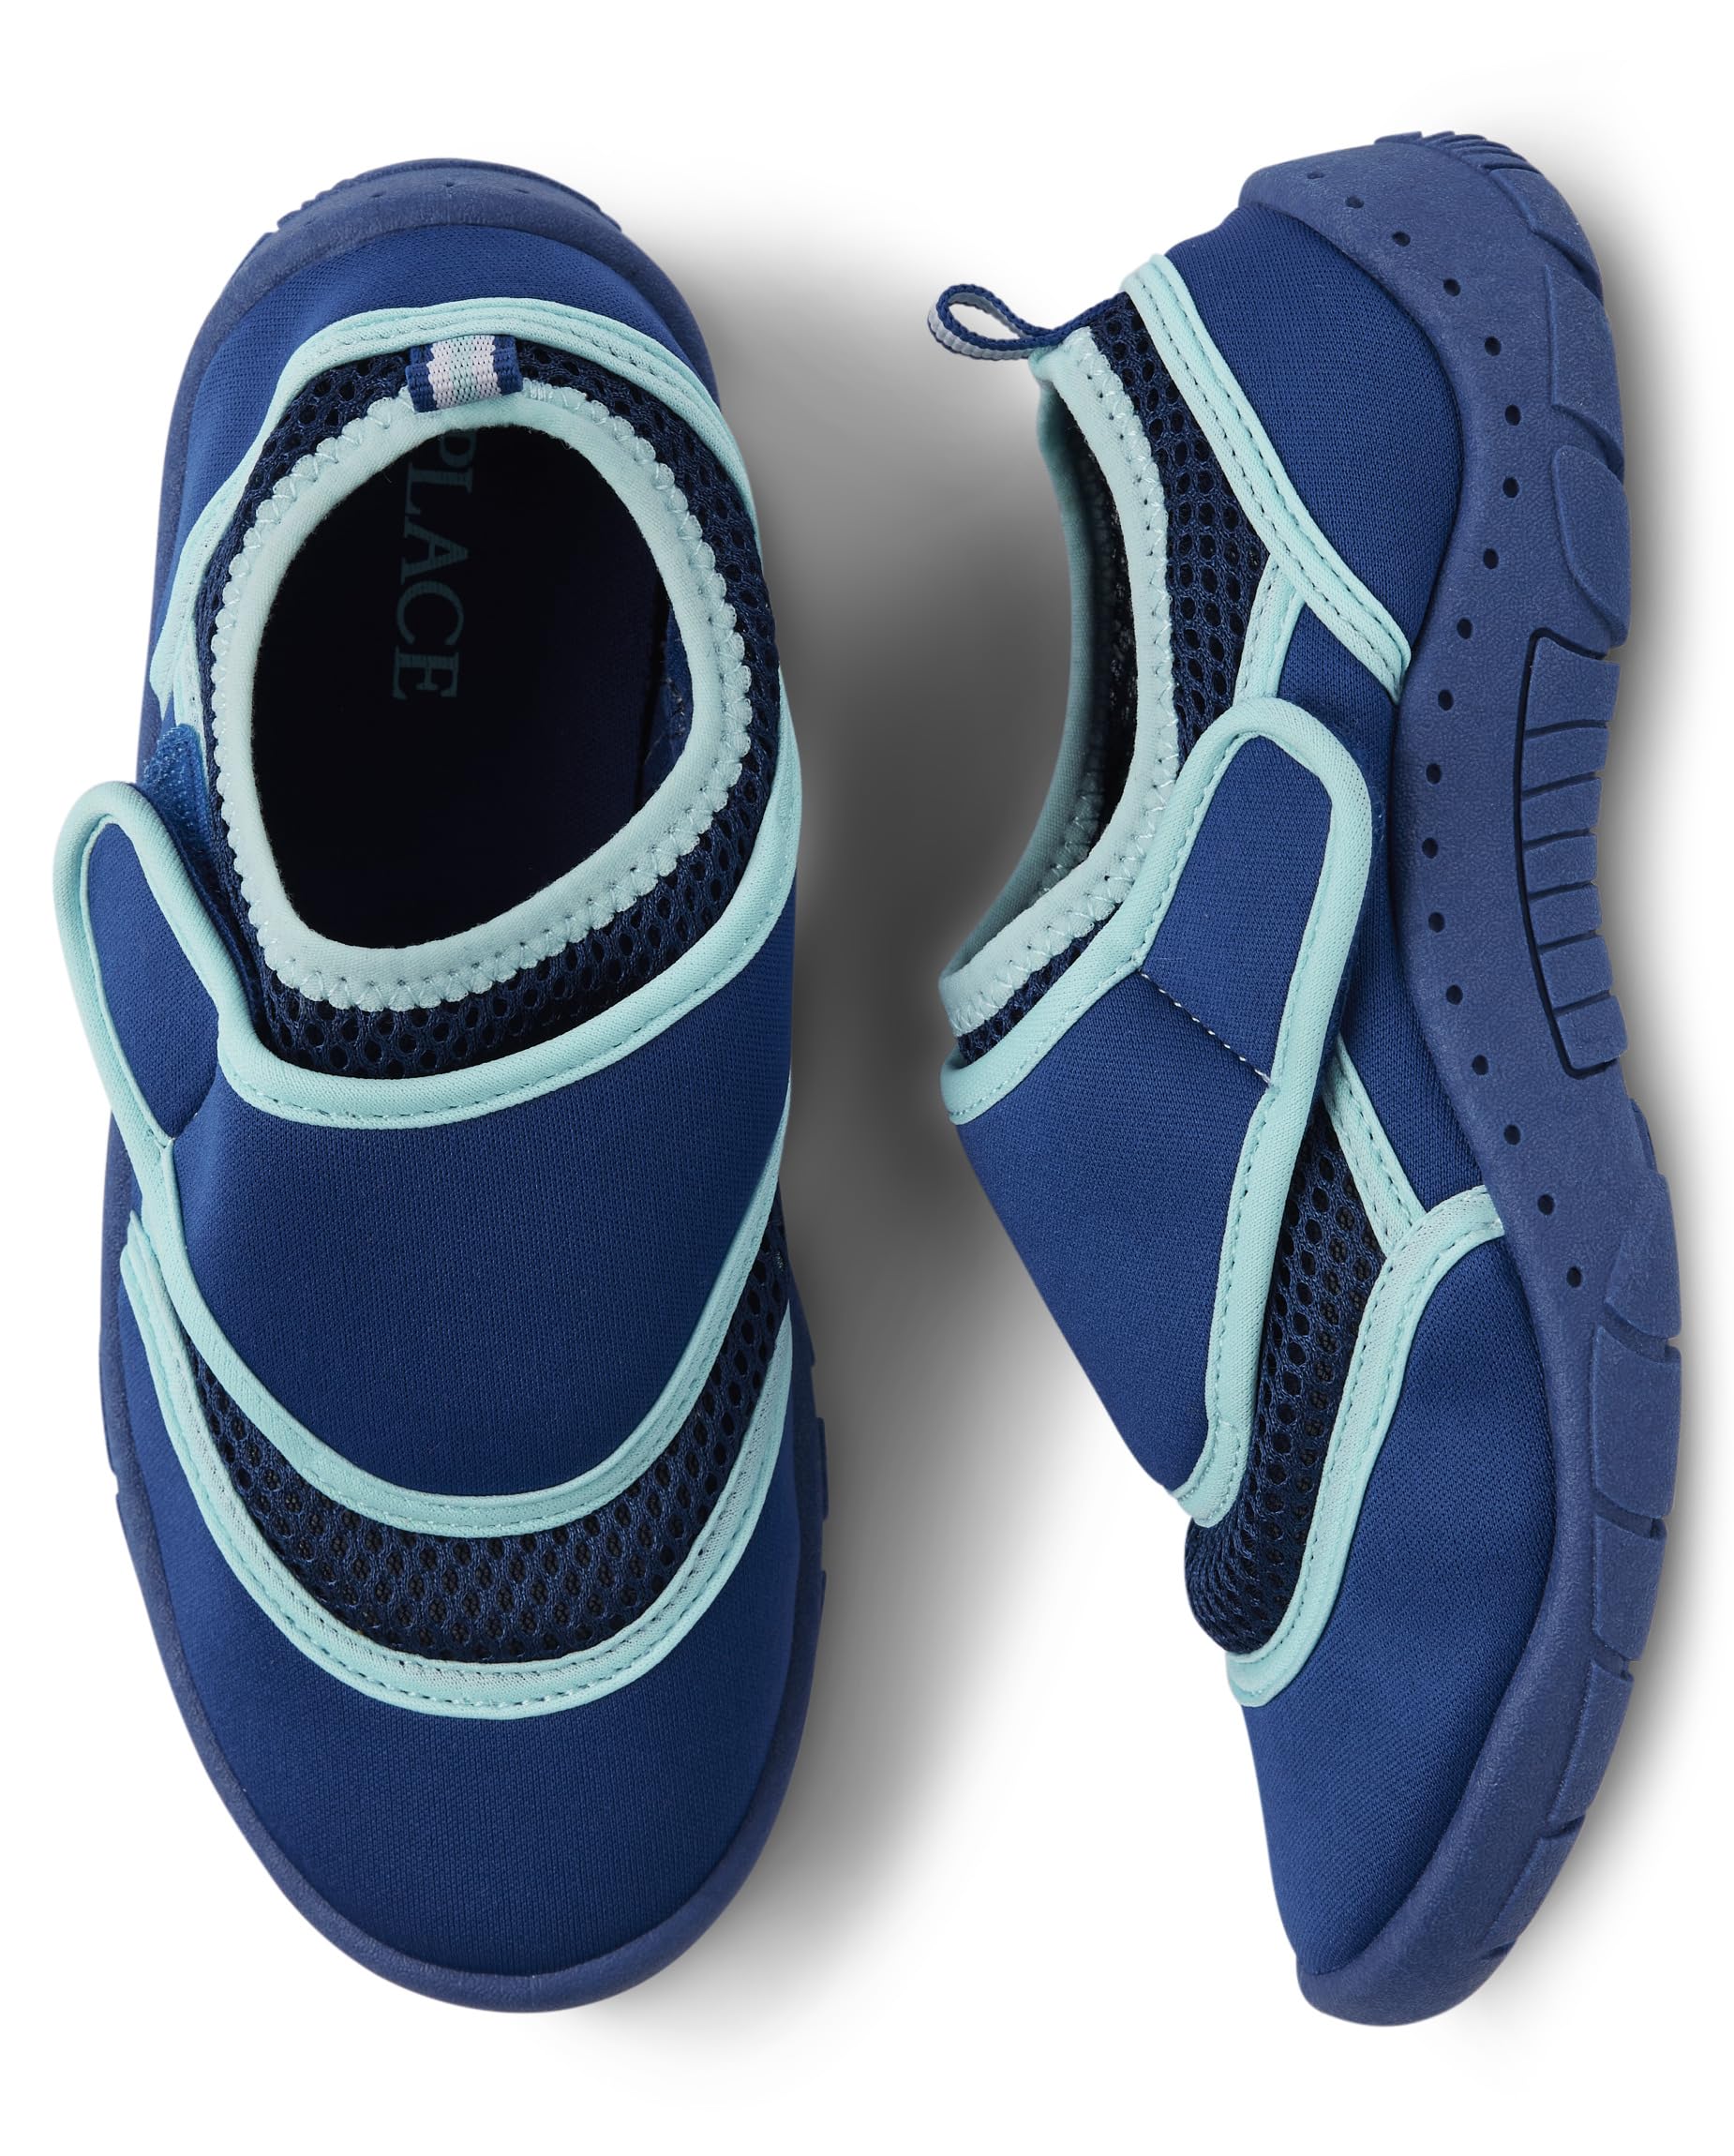 The Children's Place Boy's Water Shoes Slipper